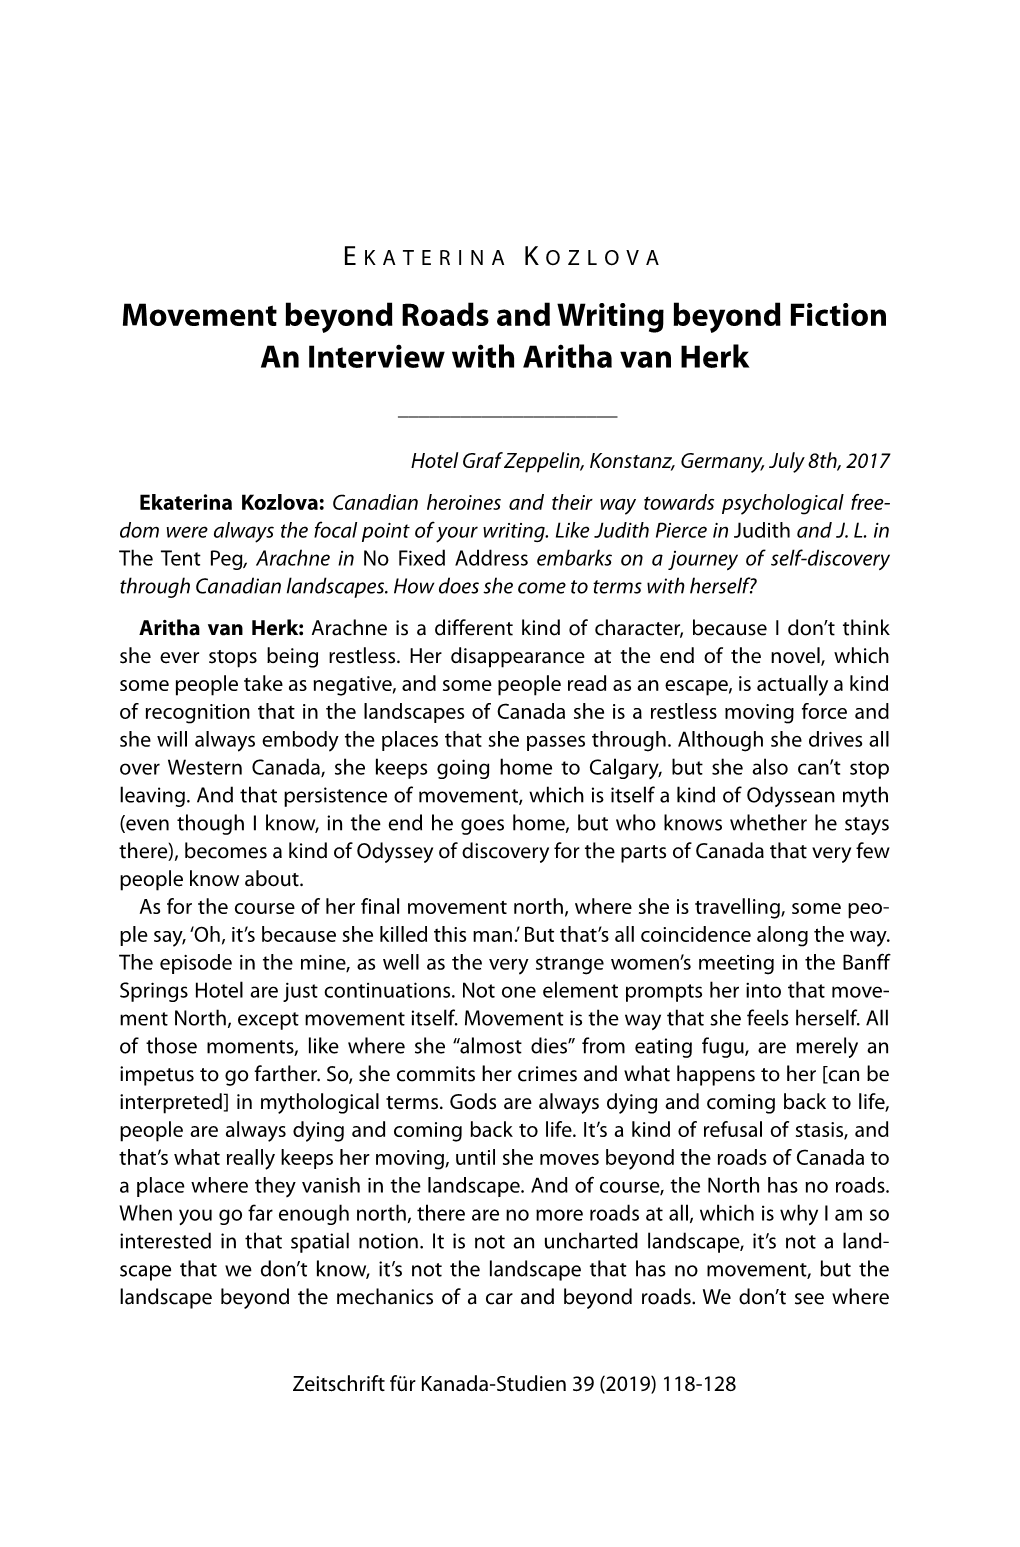 Movement Beyond Roads and Writing Beyond Fiction an Interview with Aritha Van Herk